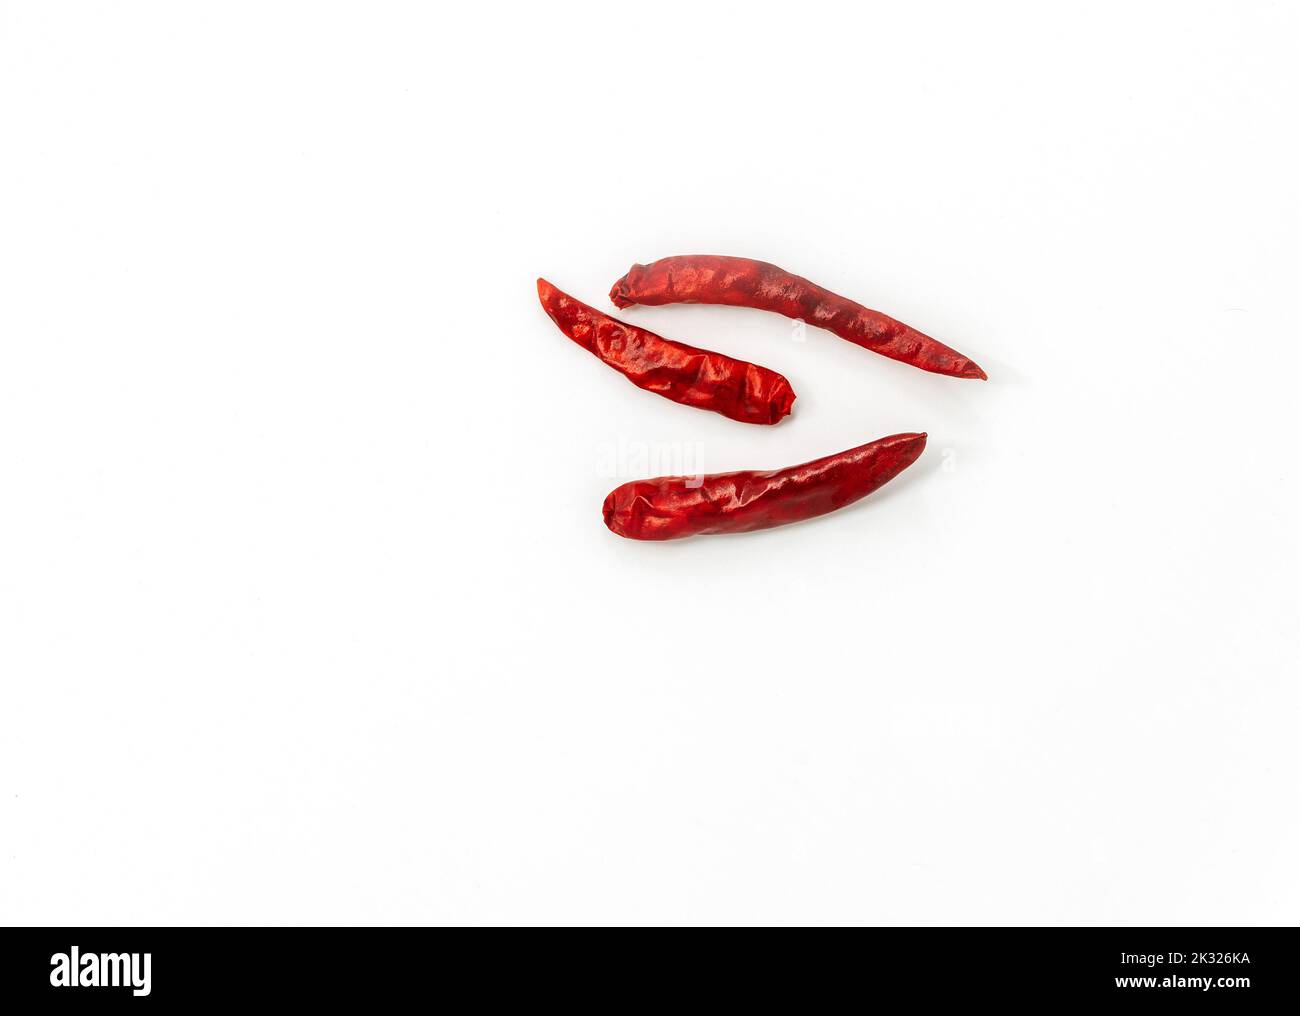 Isolated dried chili on white background, top view image of dried chili. Stock Photo